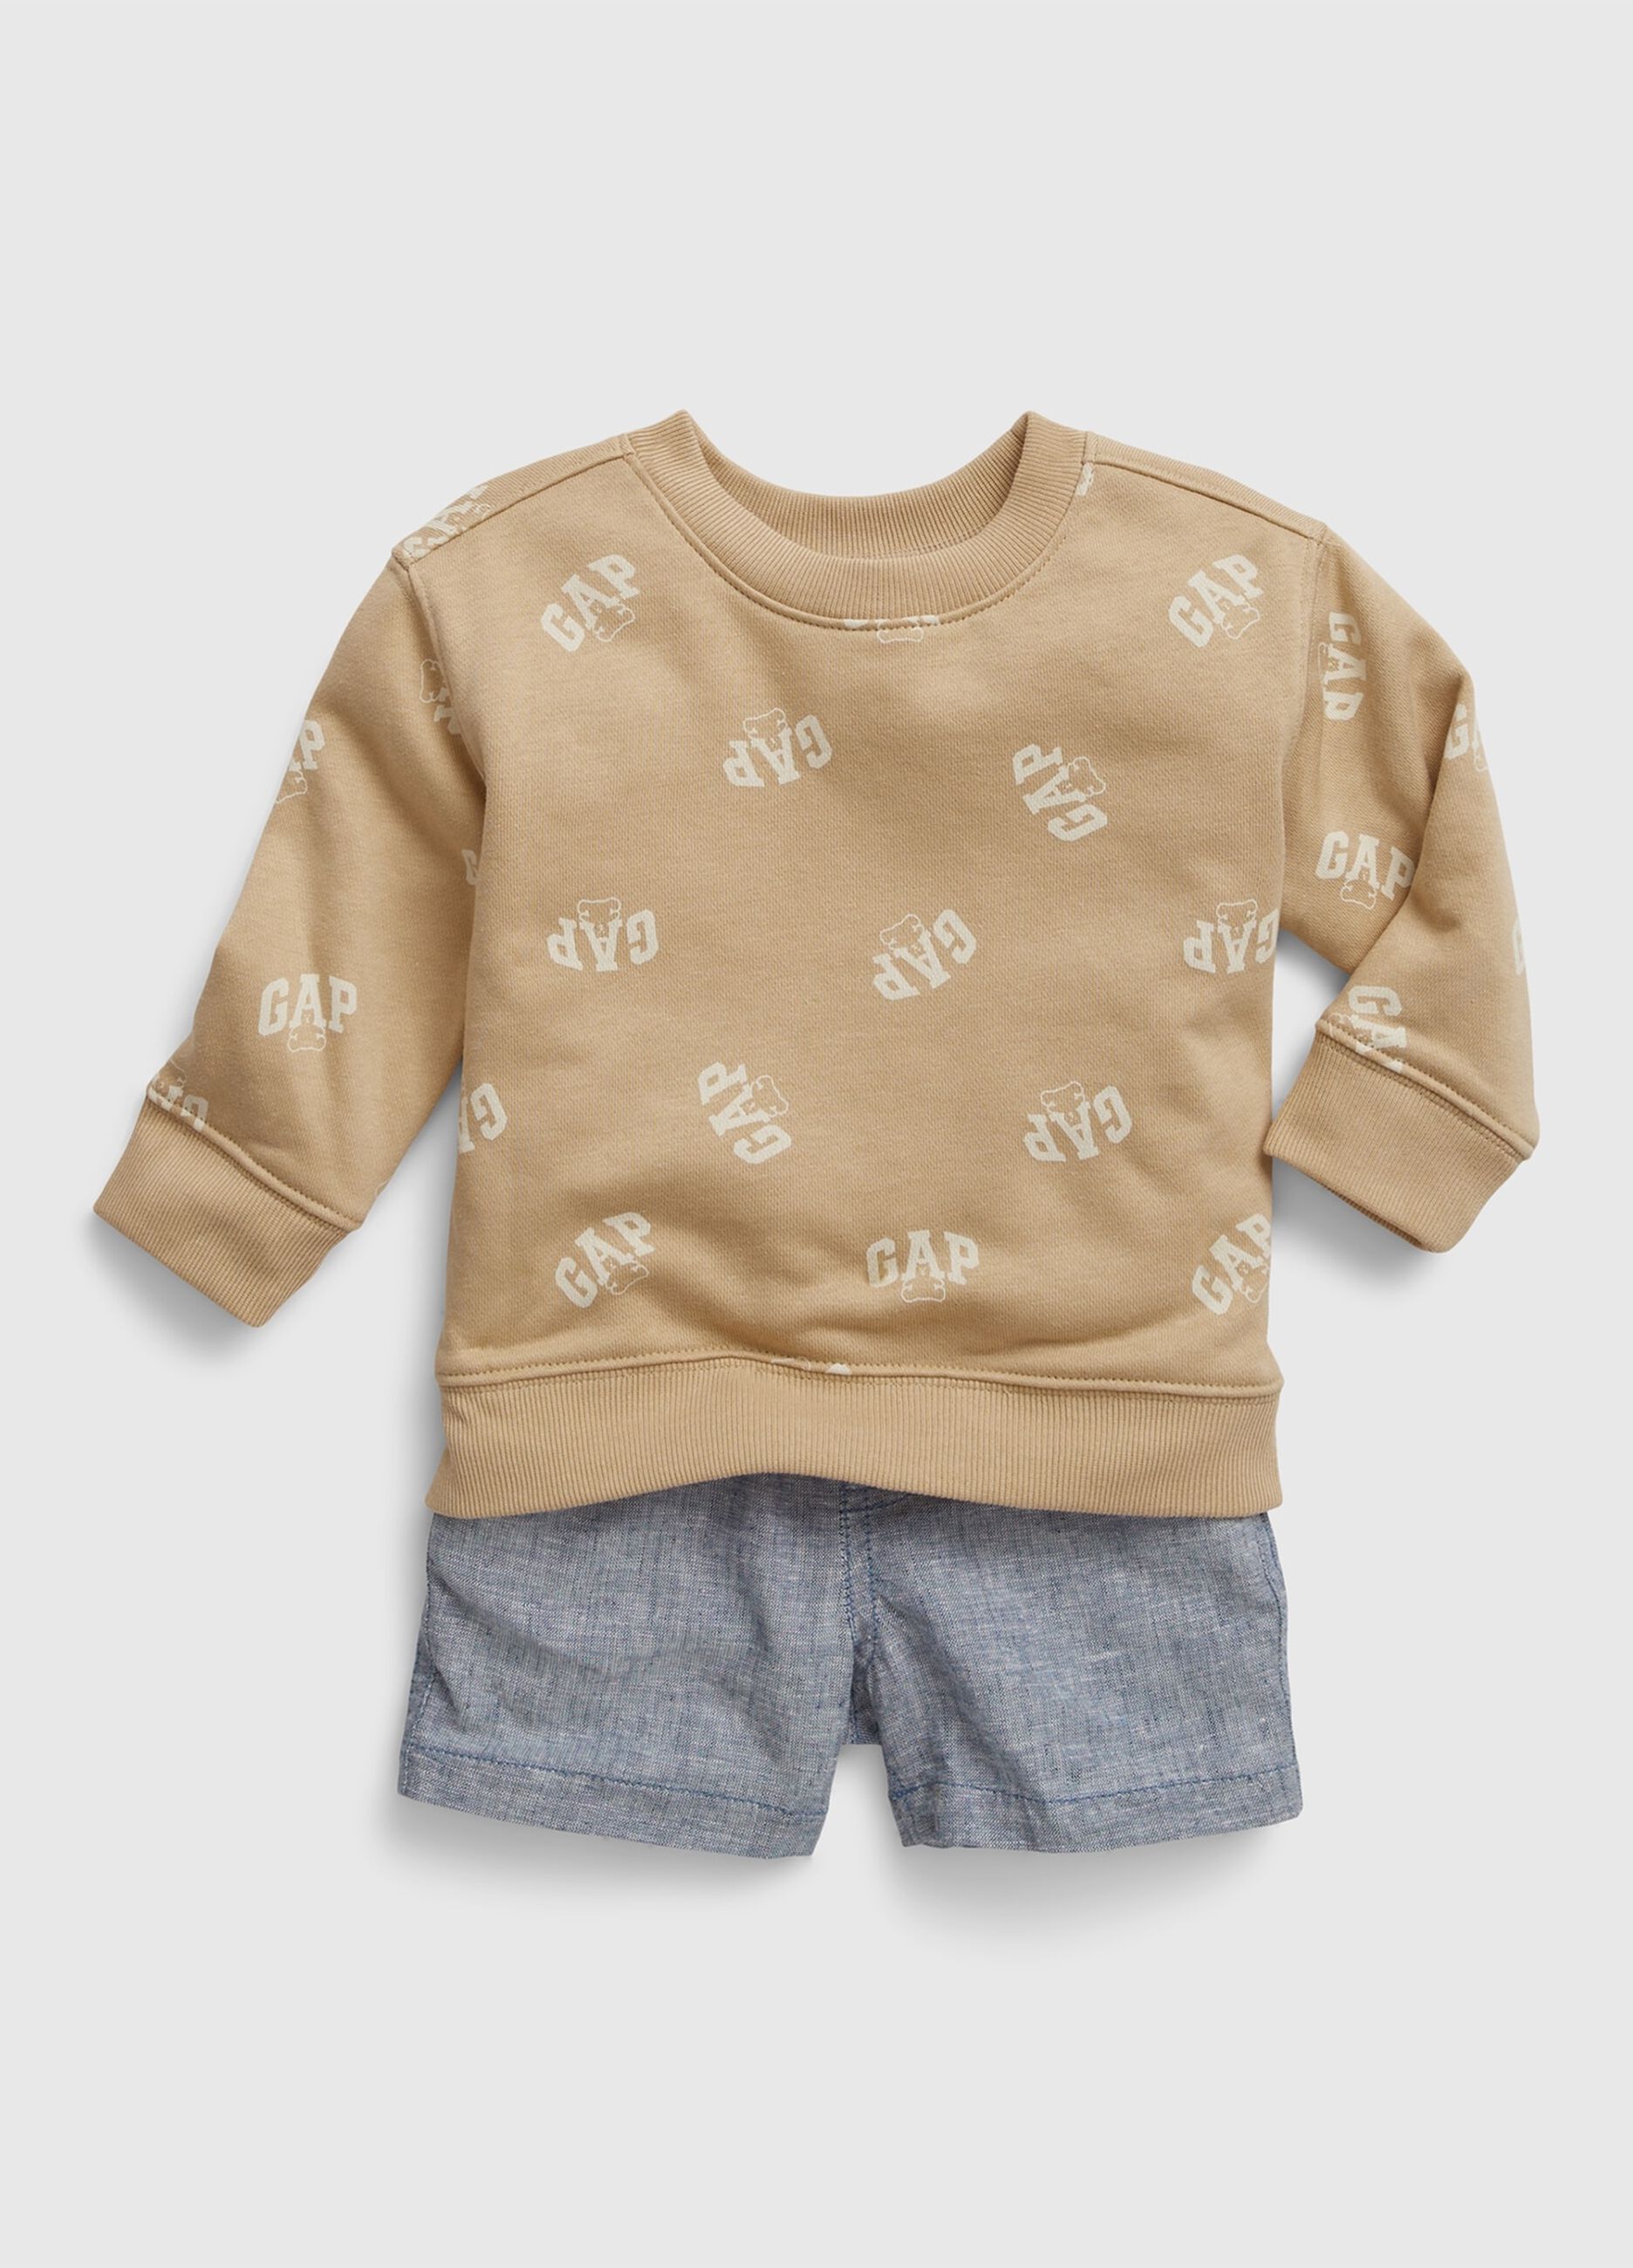 Jogging set with sweatshirt and shorts in cotton